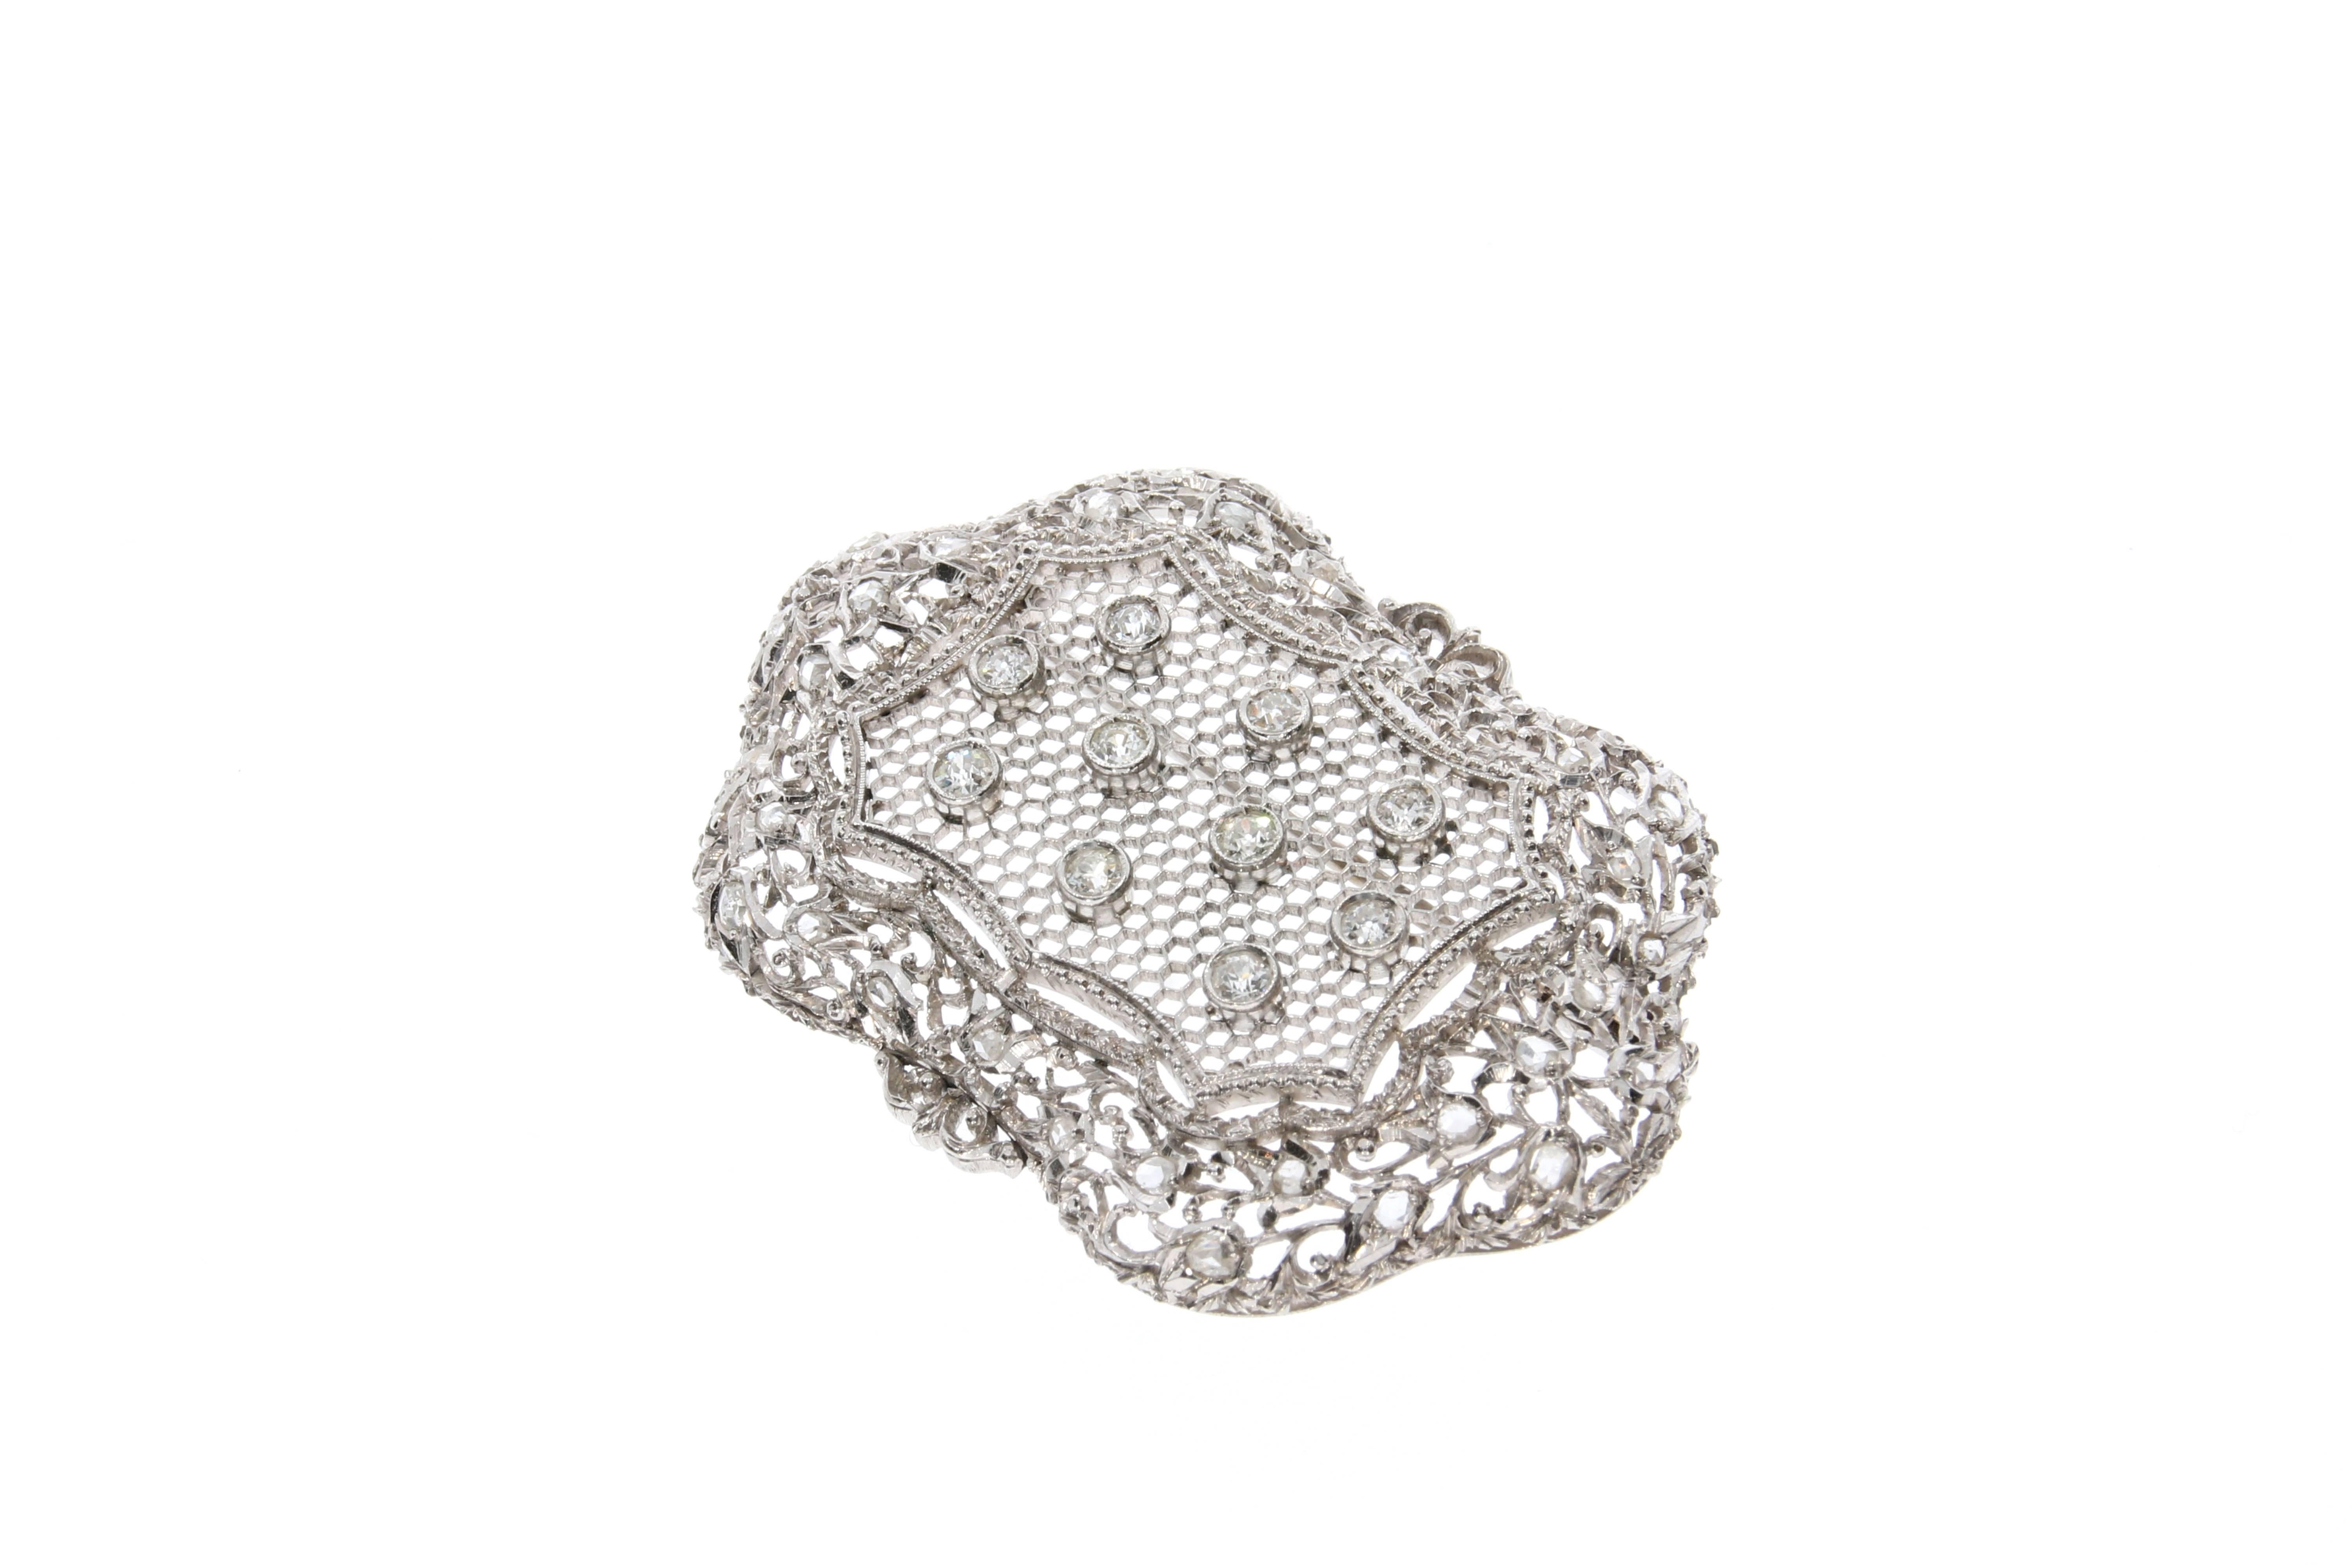 An antique platinum and diamond brooch. The intricate diamond set filigree frame is centered with a honeycomb net featuring ten diamonds weighing approximately 0.65 carats in total. The frame is decorated with small rose-cut diamonds weighing